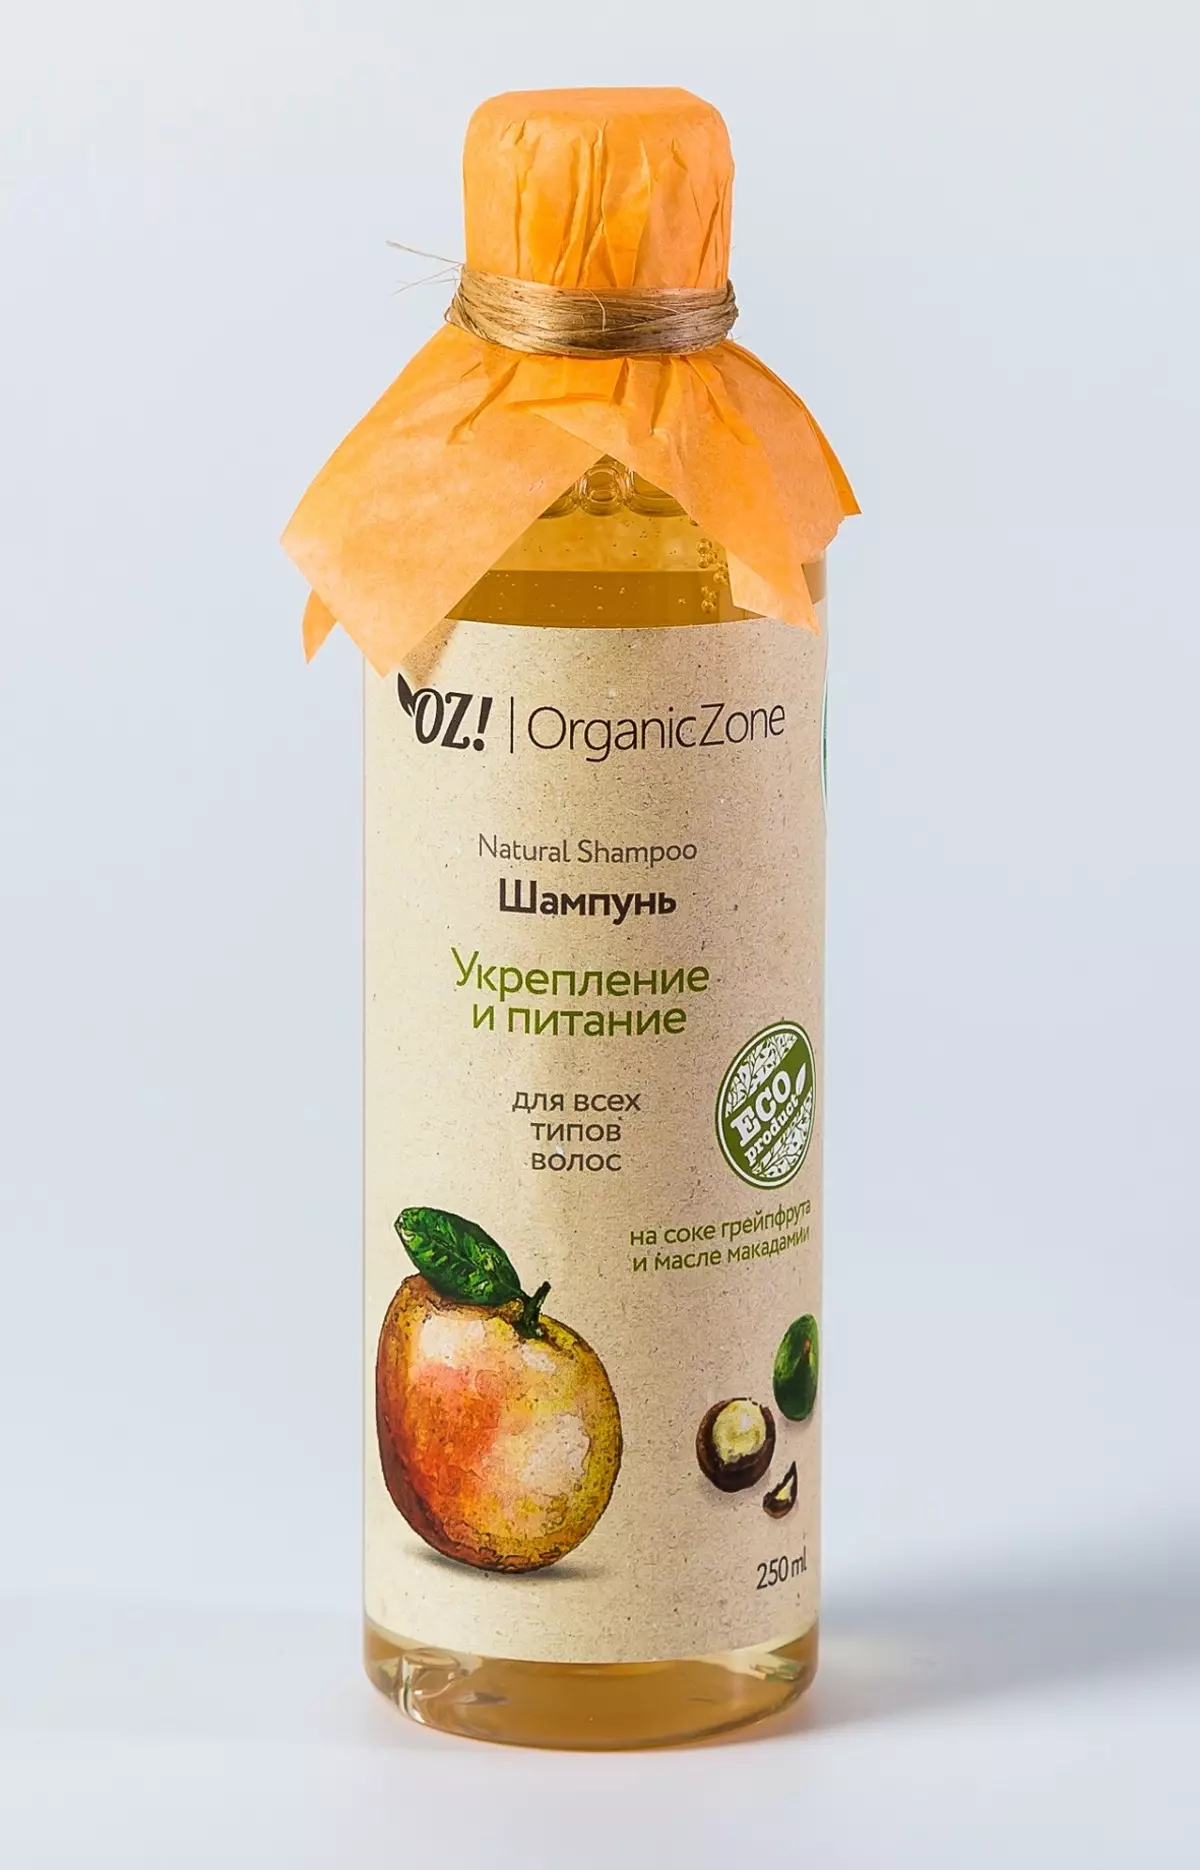 Cosmetics OZ! Organiczone: Product Overview, Pros and Cons, Choose and Reviews 4764_14